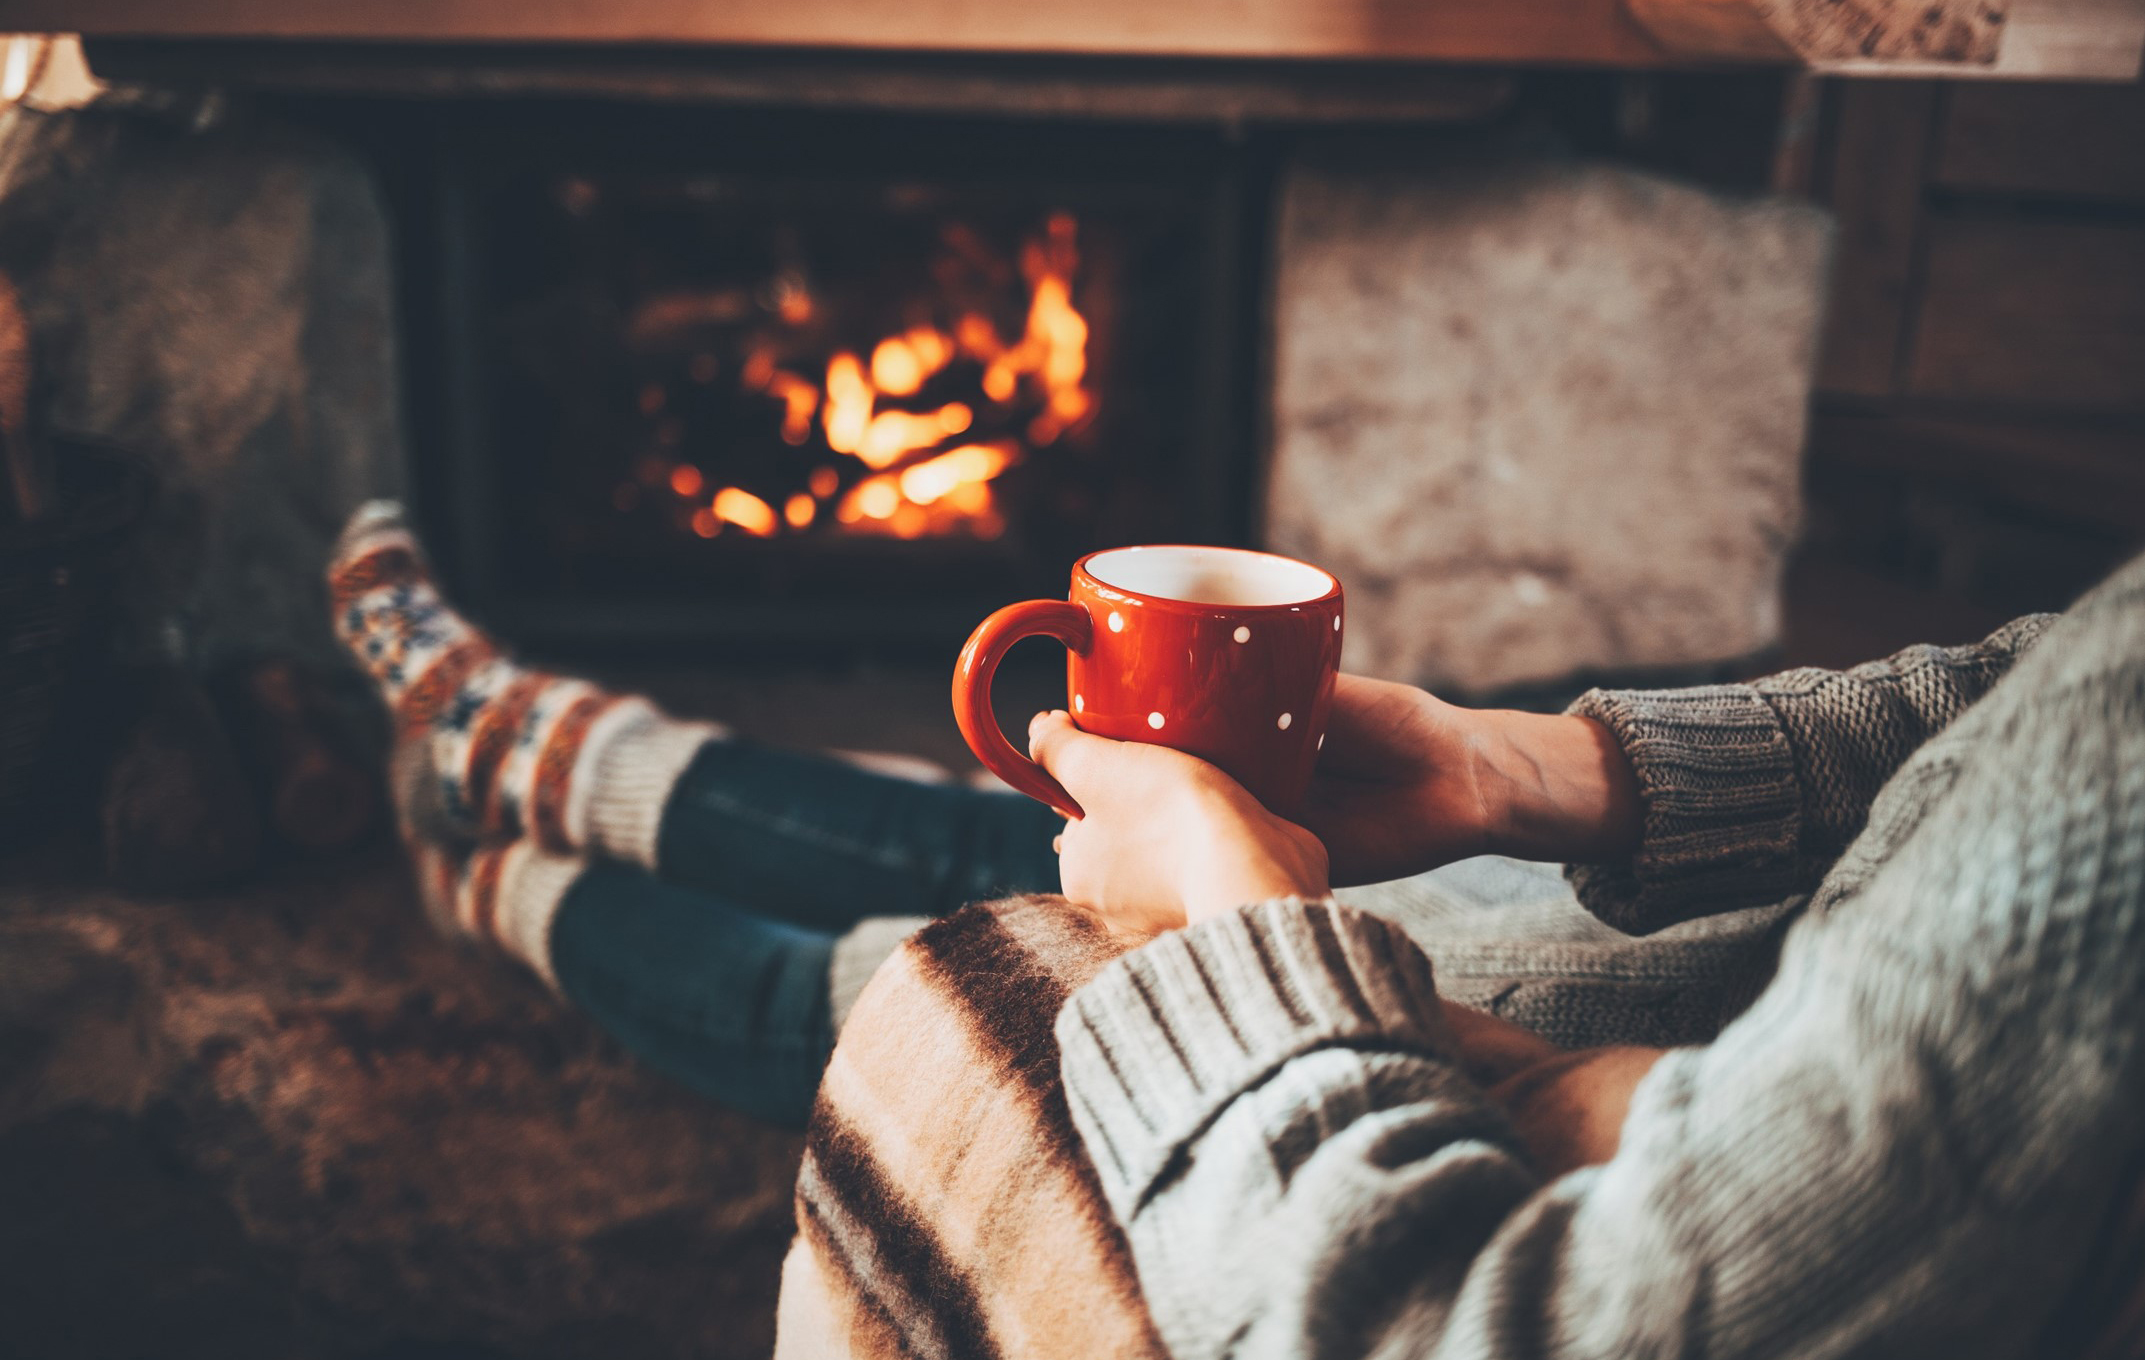 Woman enjoying a coffee in front of fire